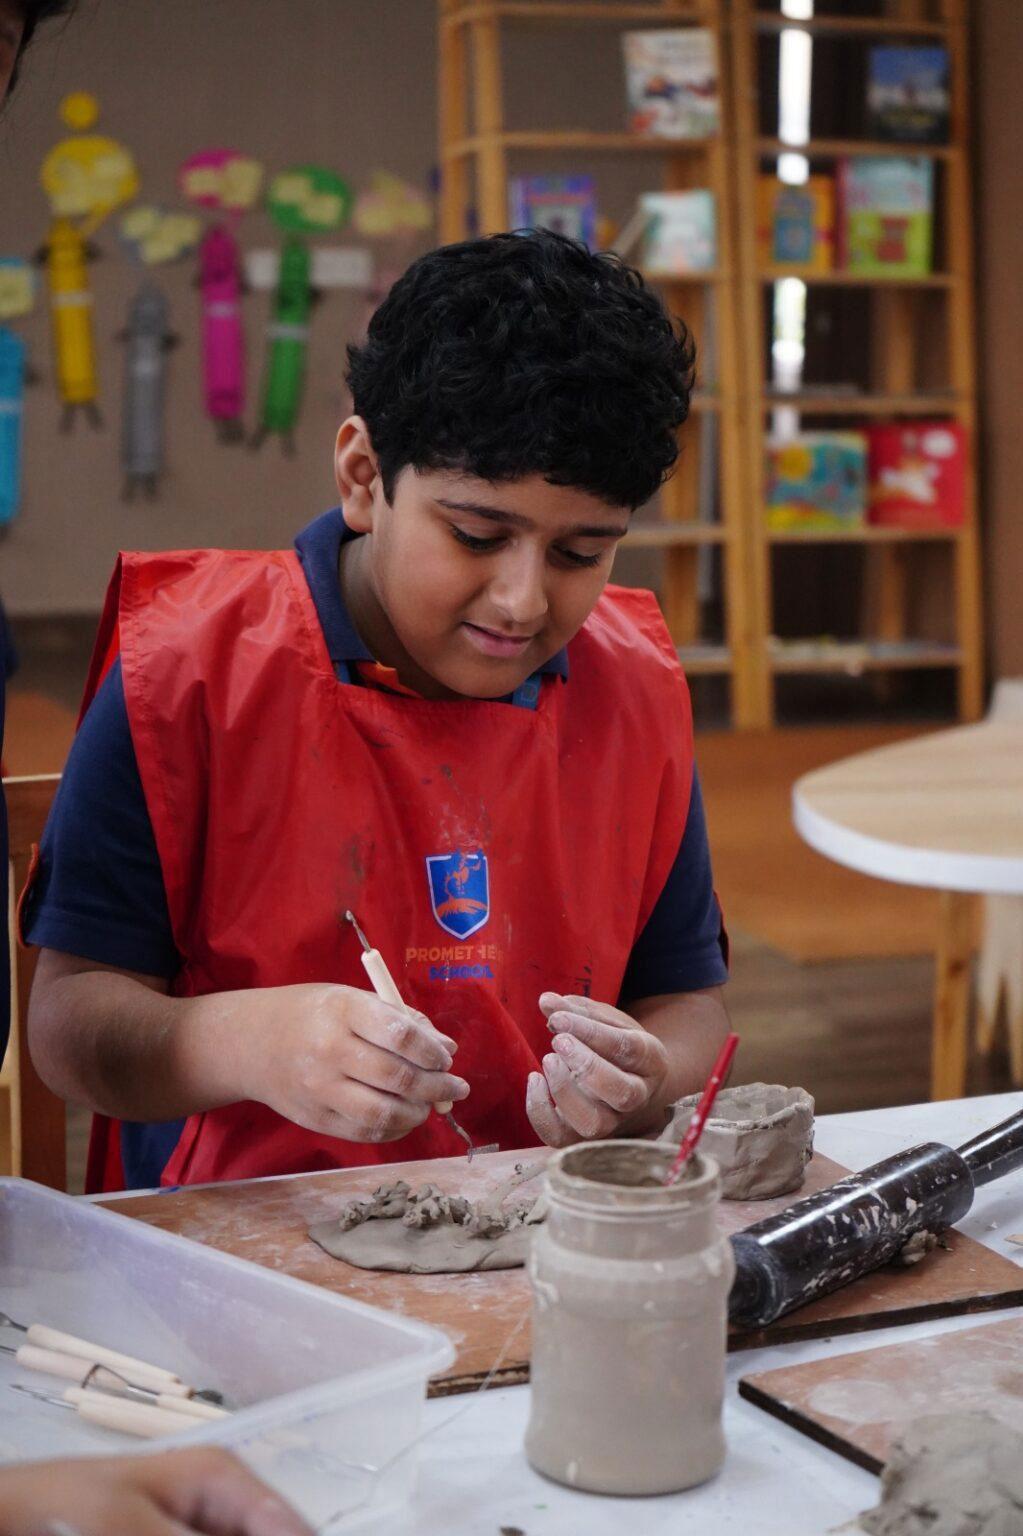 Primary students at Prometheus School are experimenting with various art materials and acquiring new skills every day.